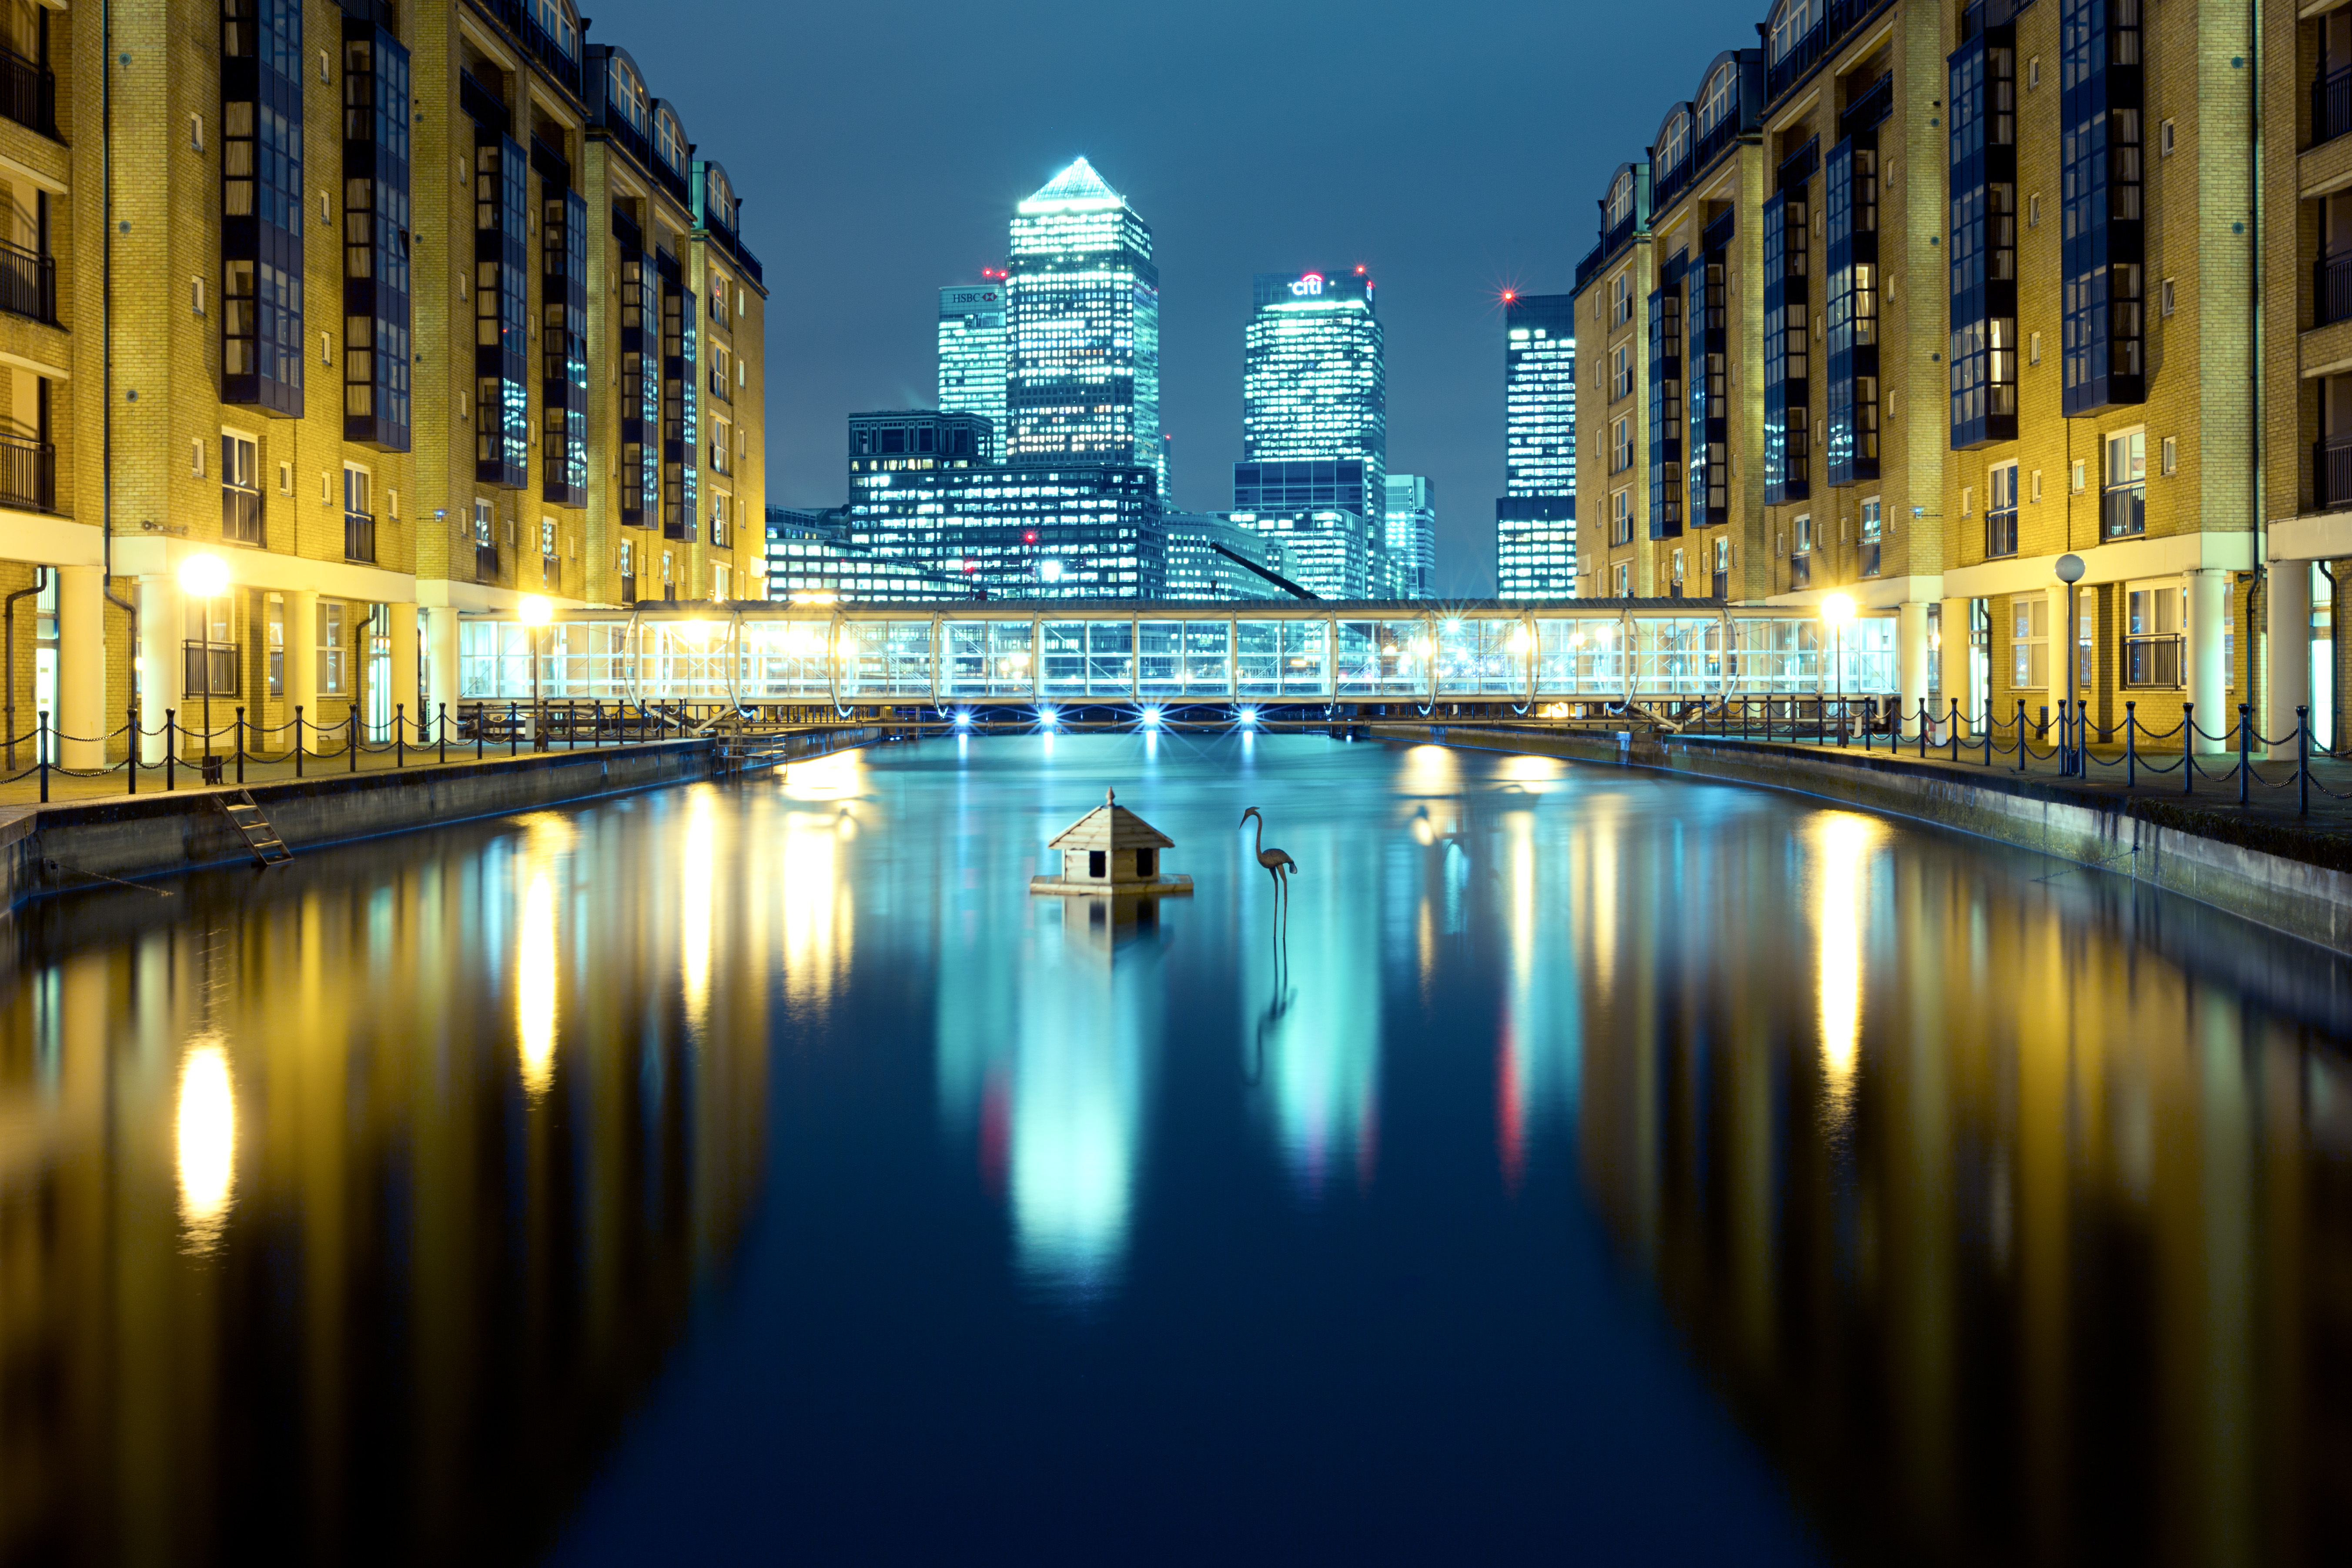 Canary Wharf In London England by Mark Towning